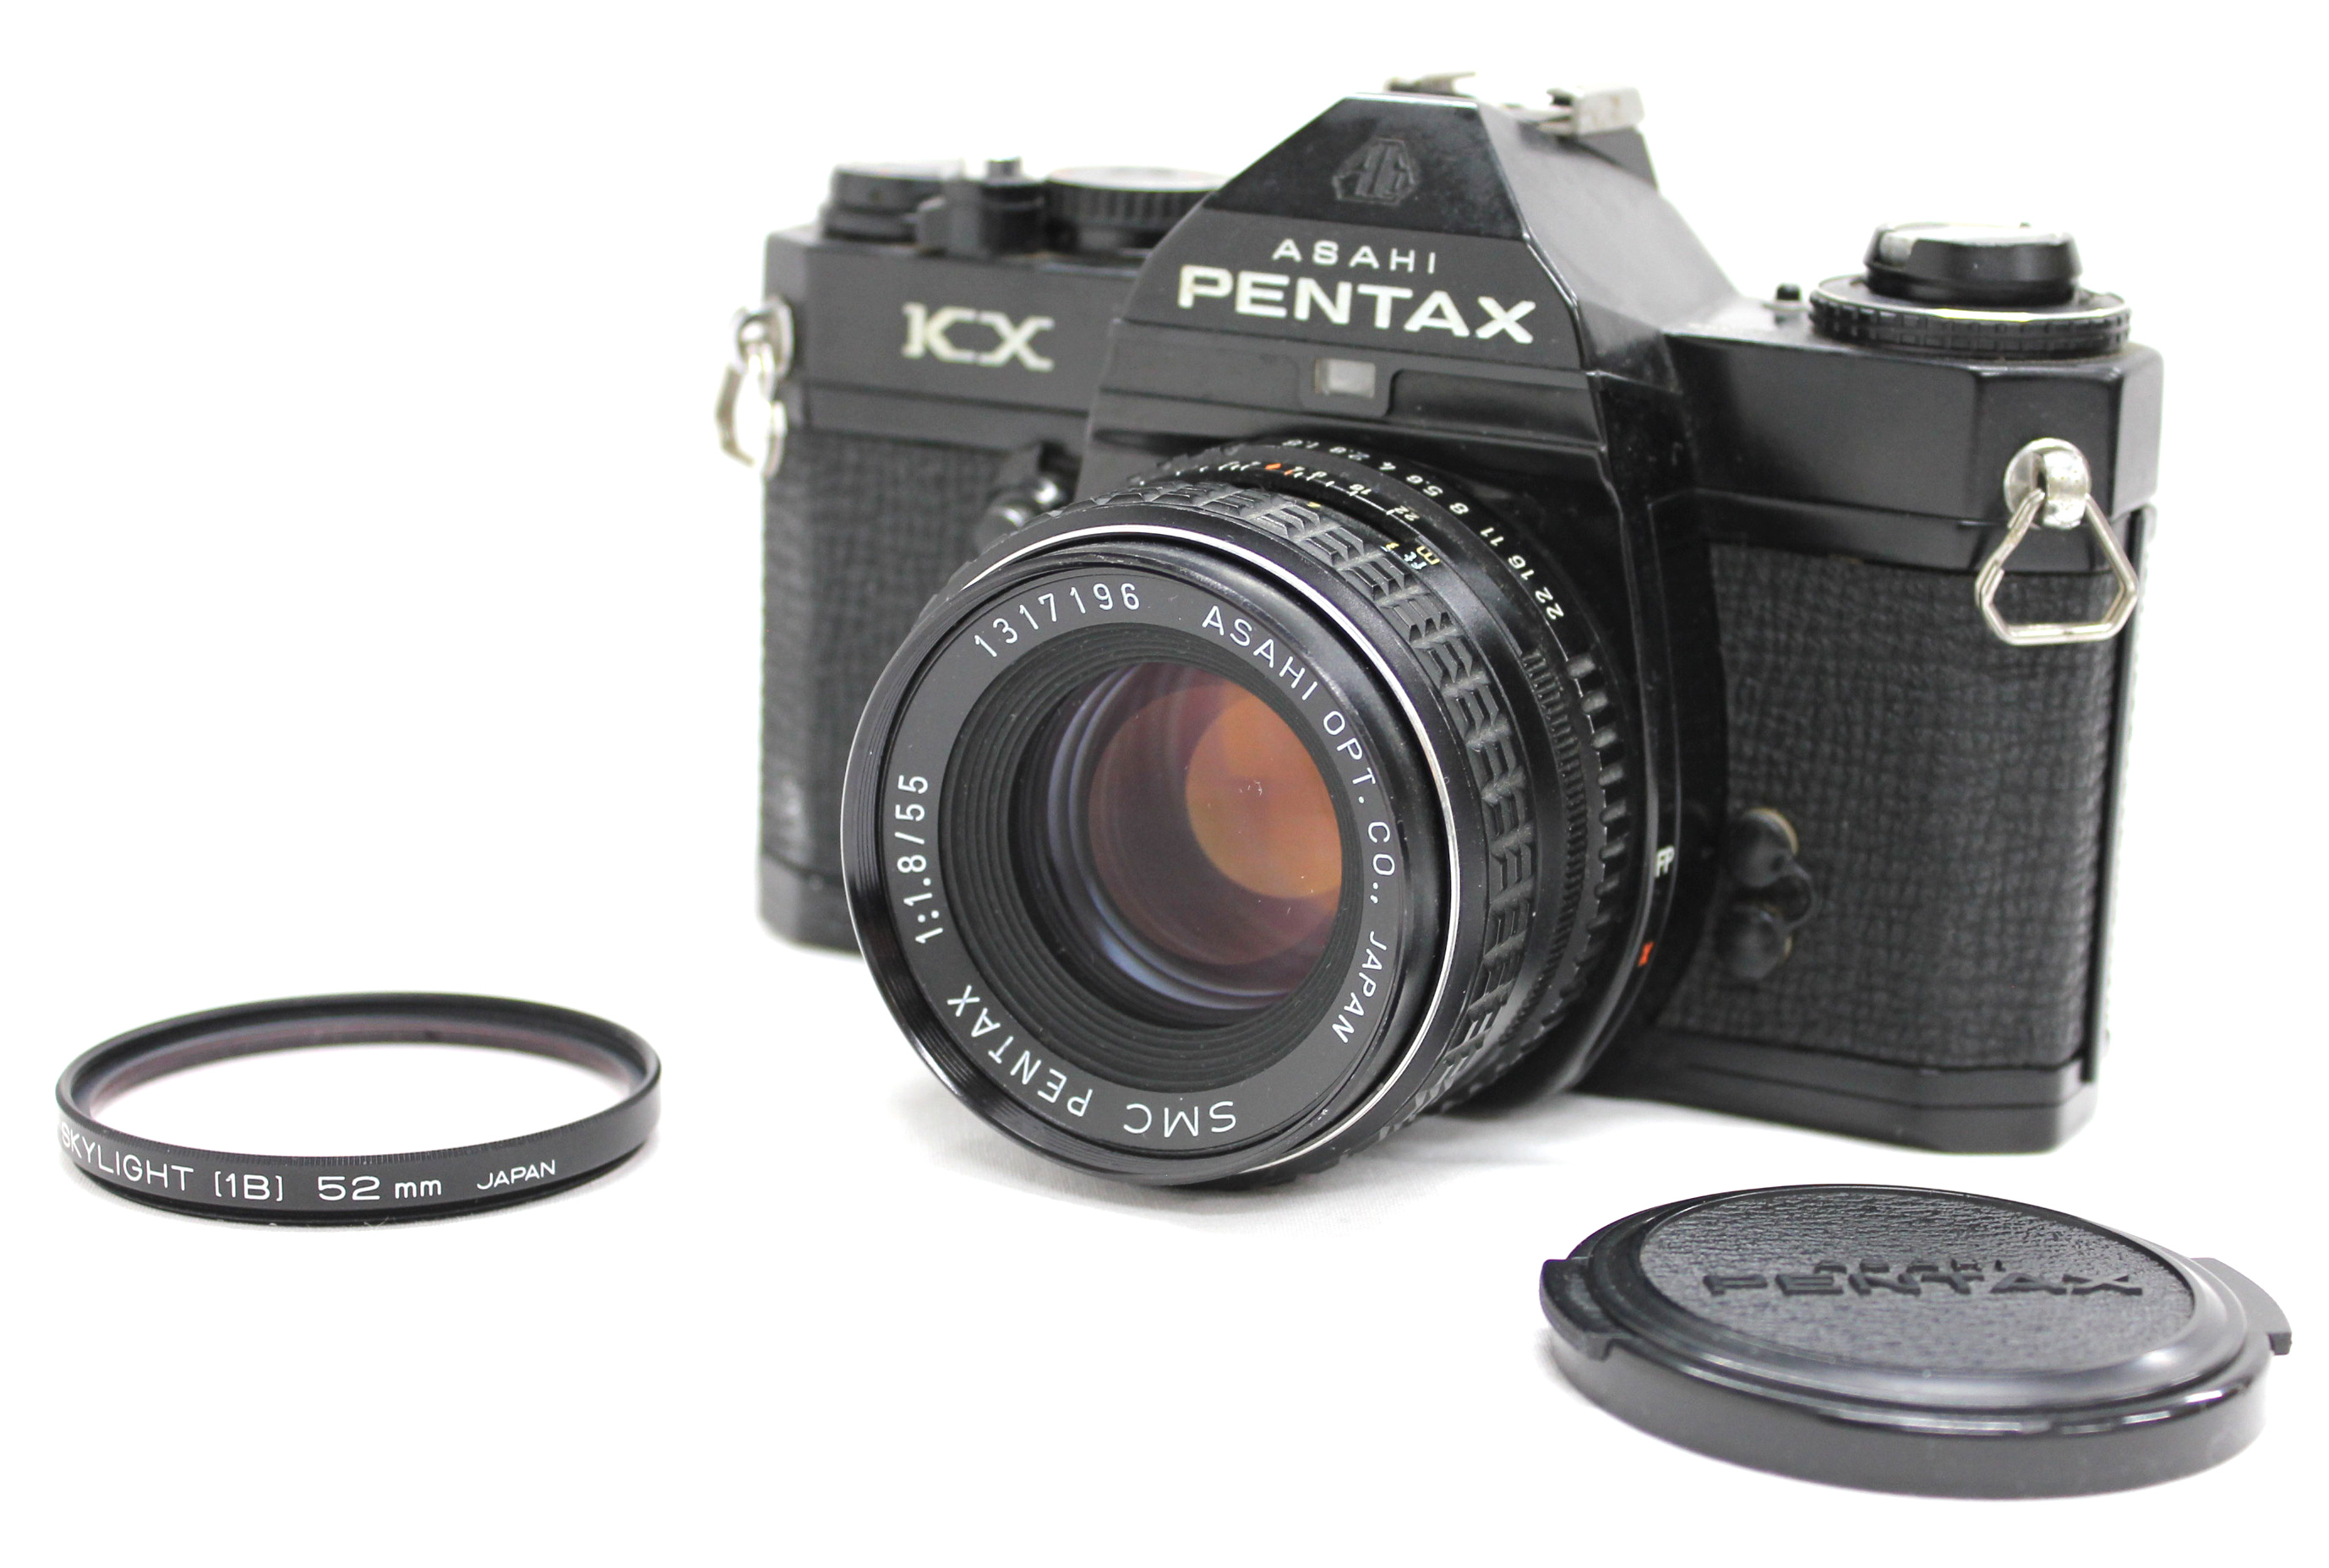 Japan Used Camera Shop | [Excellent+++] Pentax KX Black Camera Body with SMC Pentax 55mm F/1.8 Lens from Japan